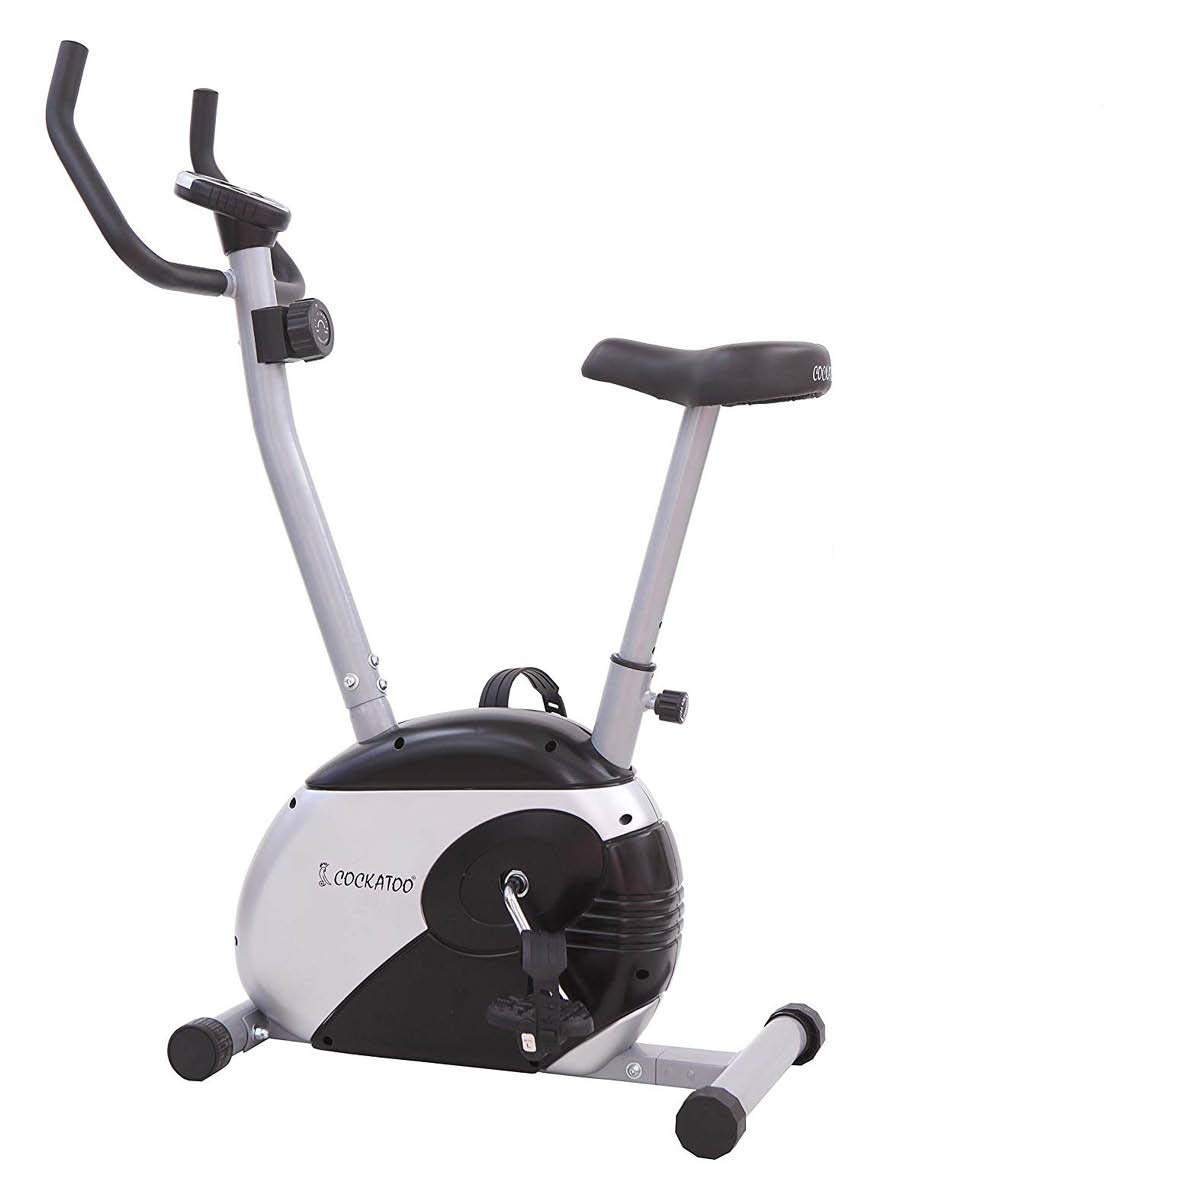 One of the best exercise bikes in India with magnetic resistance under 10000